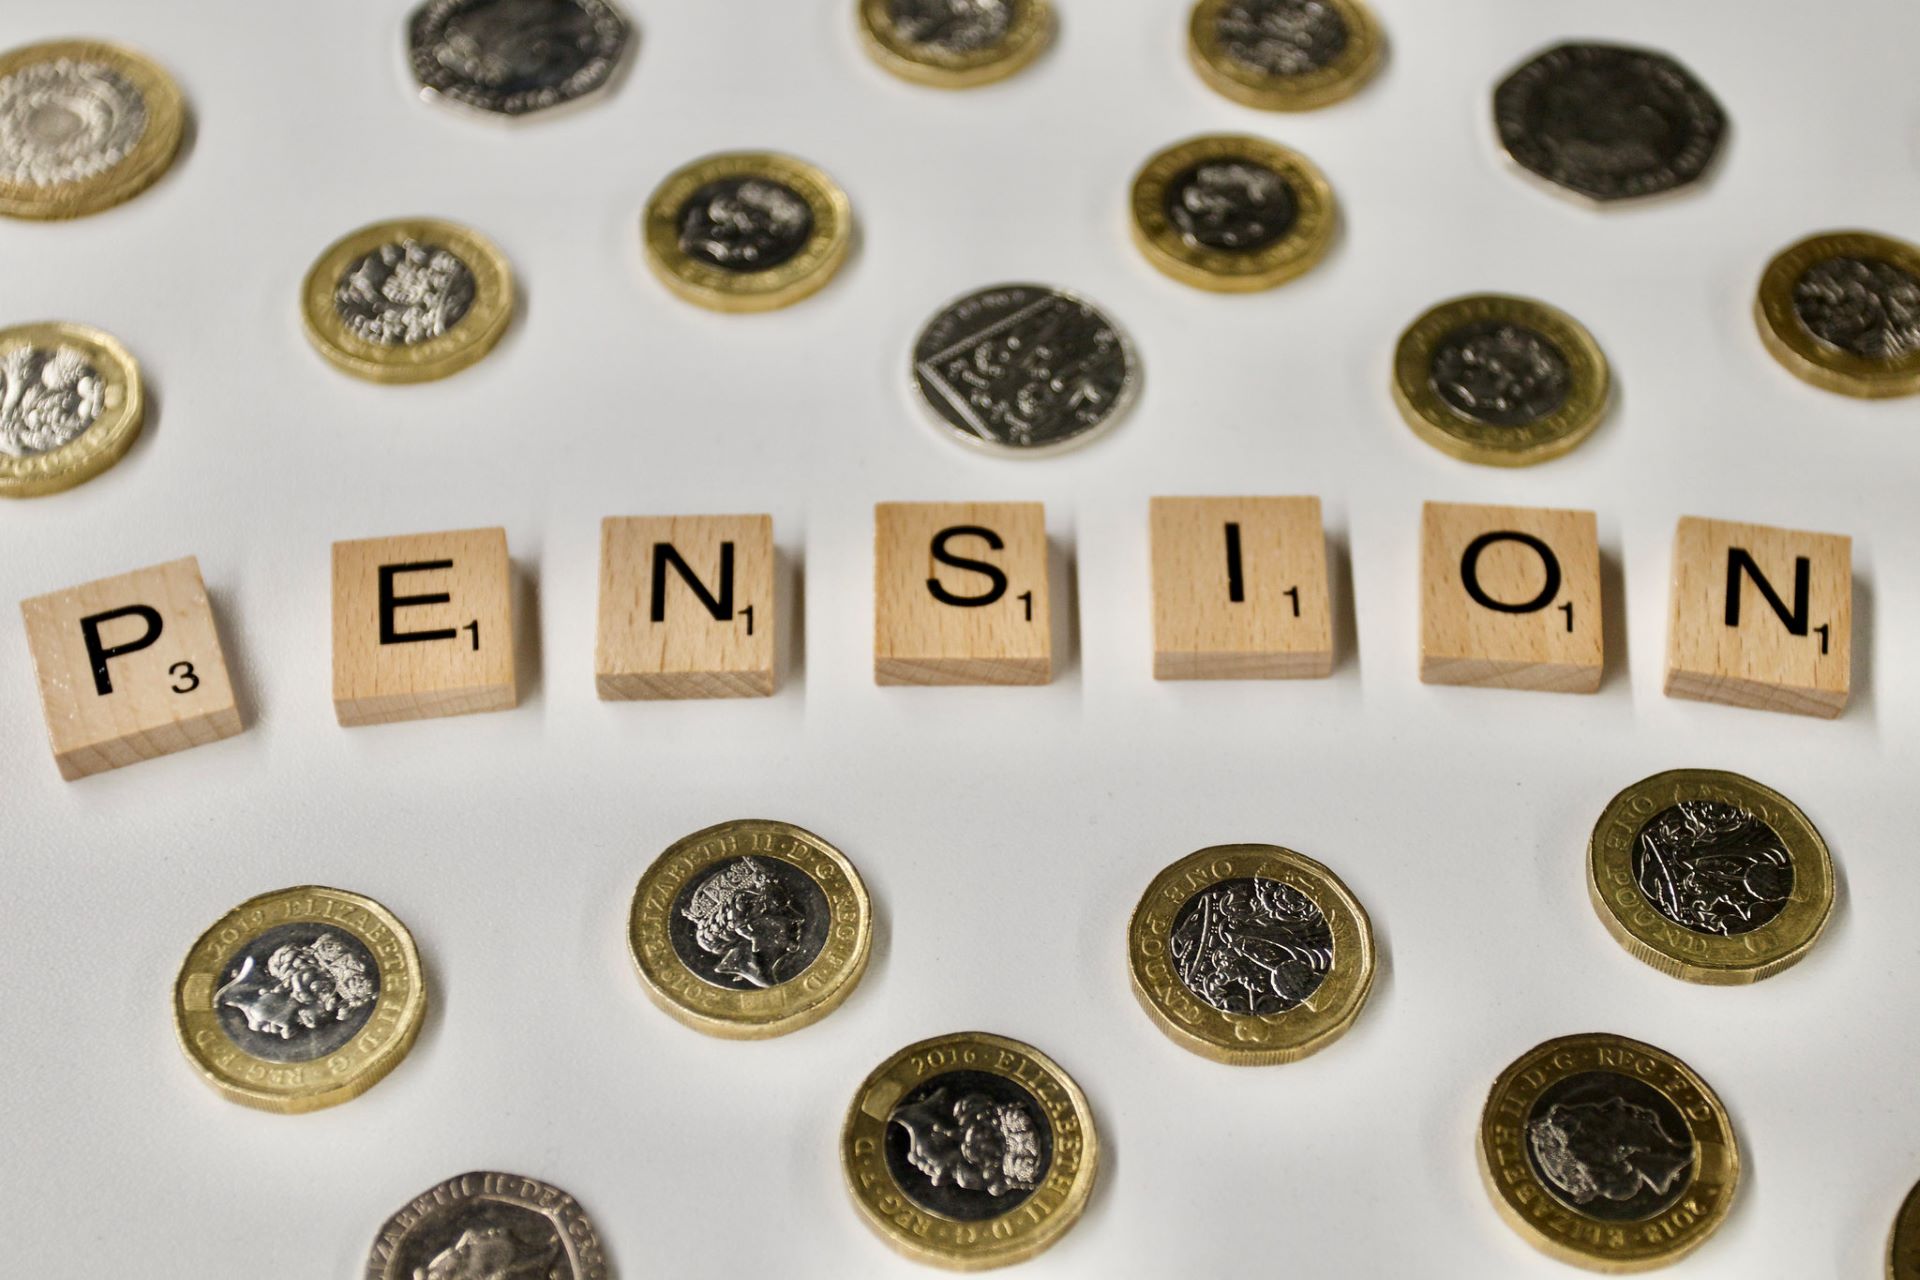 History of the emergence and development of pension funds